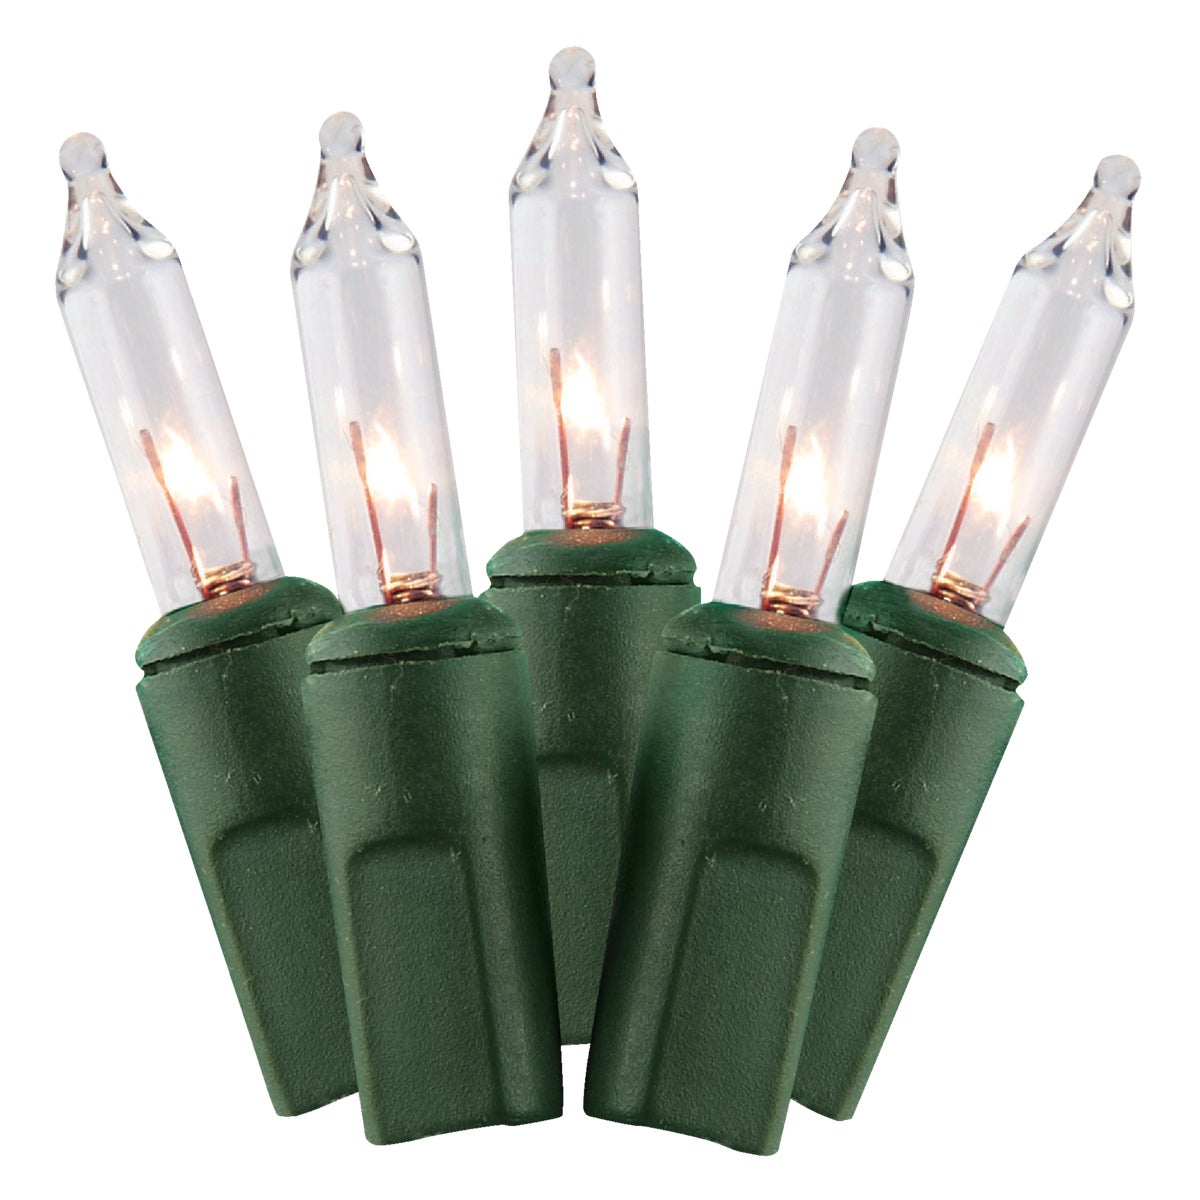 Item 900664, Miniature incandescent light set with end connector.